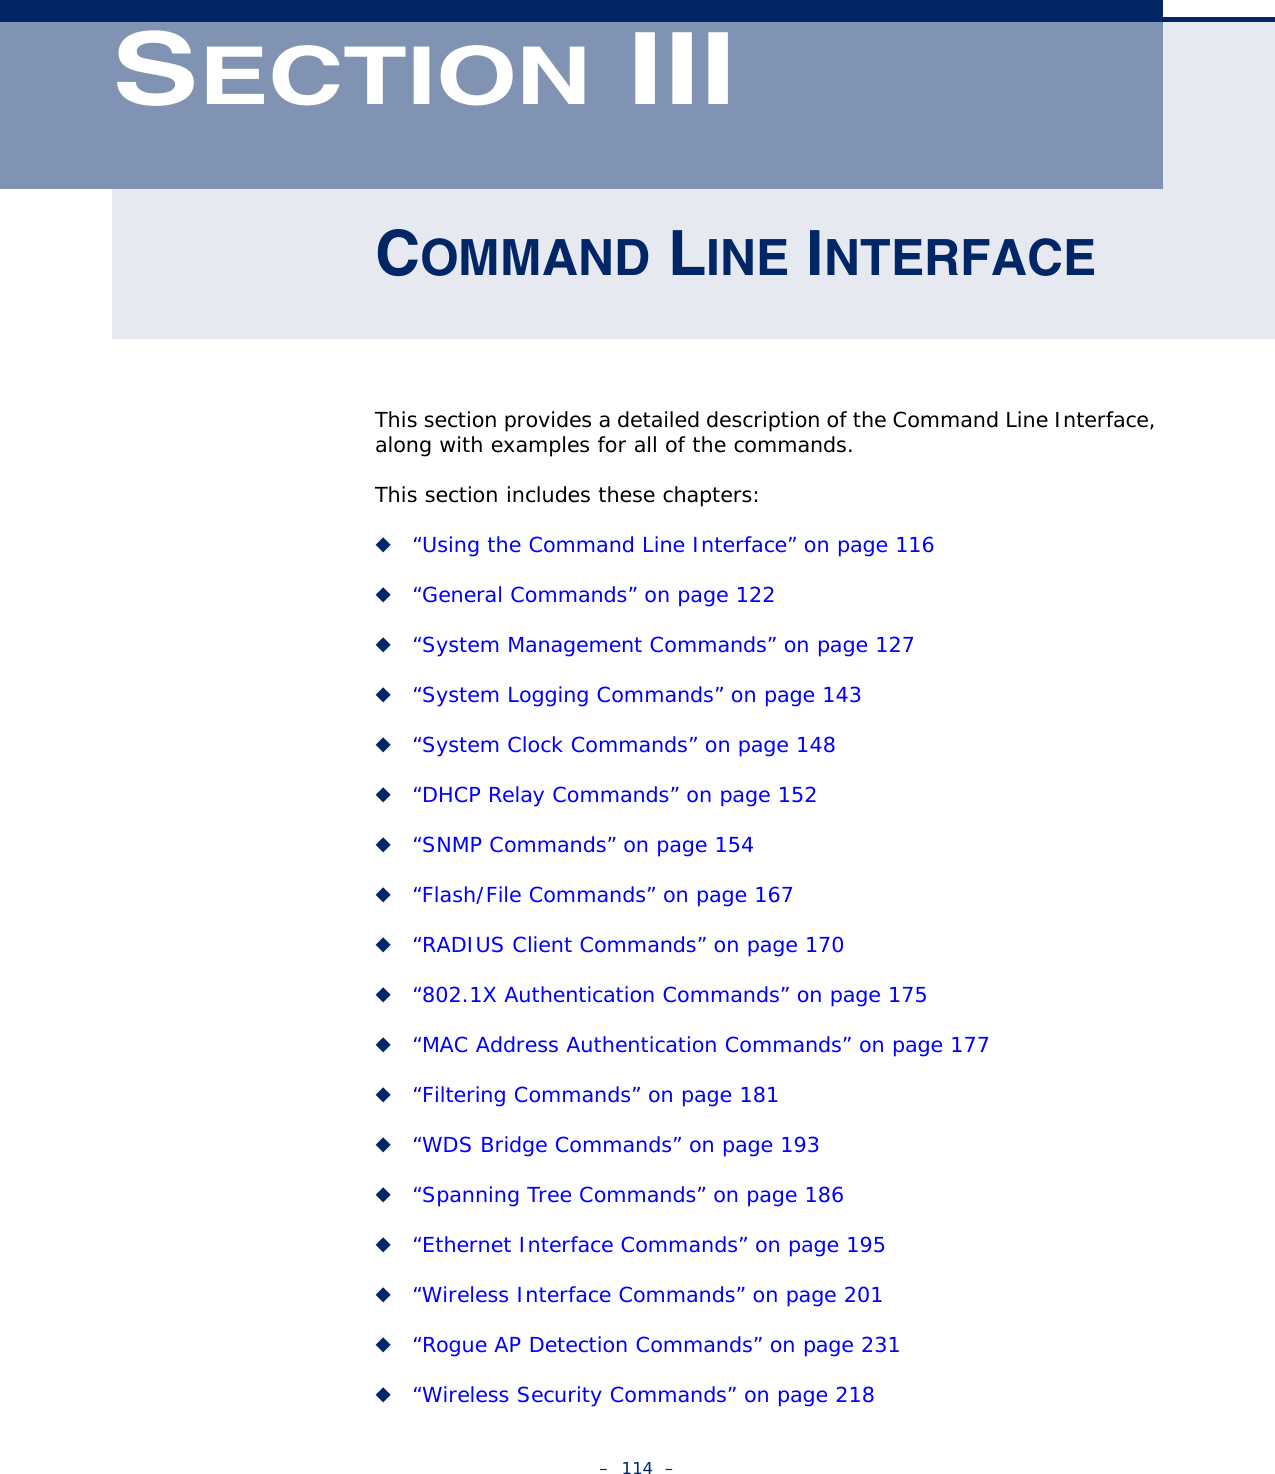 –  114  –SECTION IIICOMMAND LINE INTERFACEThis section provides a detailed description of the Command Line Interface, along with examples for all of the commands. This section includes these chapters:◆“Using the Command Line Interface” on page 116◆“General Commands” on page 122◆“System Management Commands” on page 127◆“System Logging Commands” on page 143◆“System Clock Commands” on page 148◆“DHCP Relay Commands” on page 152◆“SNMP Commands” on page 154◆“Flash/File Commands” on page 167◆“RADIUS Client Commands” on page 170◆“802.1X Authentication Commands” on page 175◆“MAC Address Authentication Commands” on page 177◆“Filtering Commands” on page 181◆“WDS Bridge Commands” on page 193◆“Spanning Tree Commands” on page 186◆“Ethernet Interface Commands” on page 195◆“Wireless Interface Commands” on page 201◆“Rogue AP Detection Commands” on page 231◆“Wireless Security Commands” on page 218